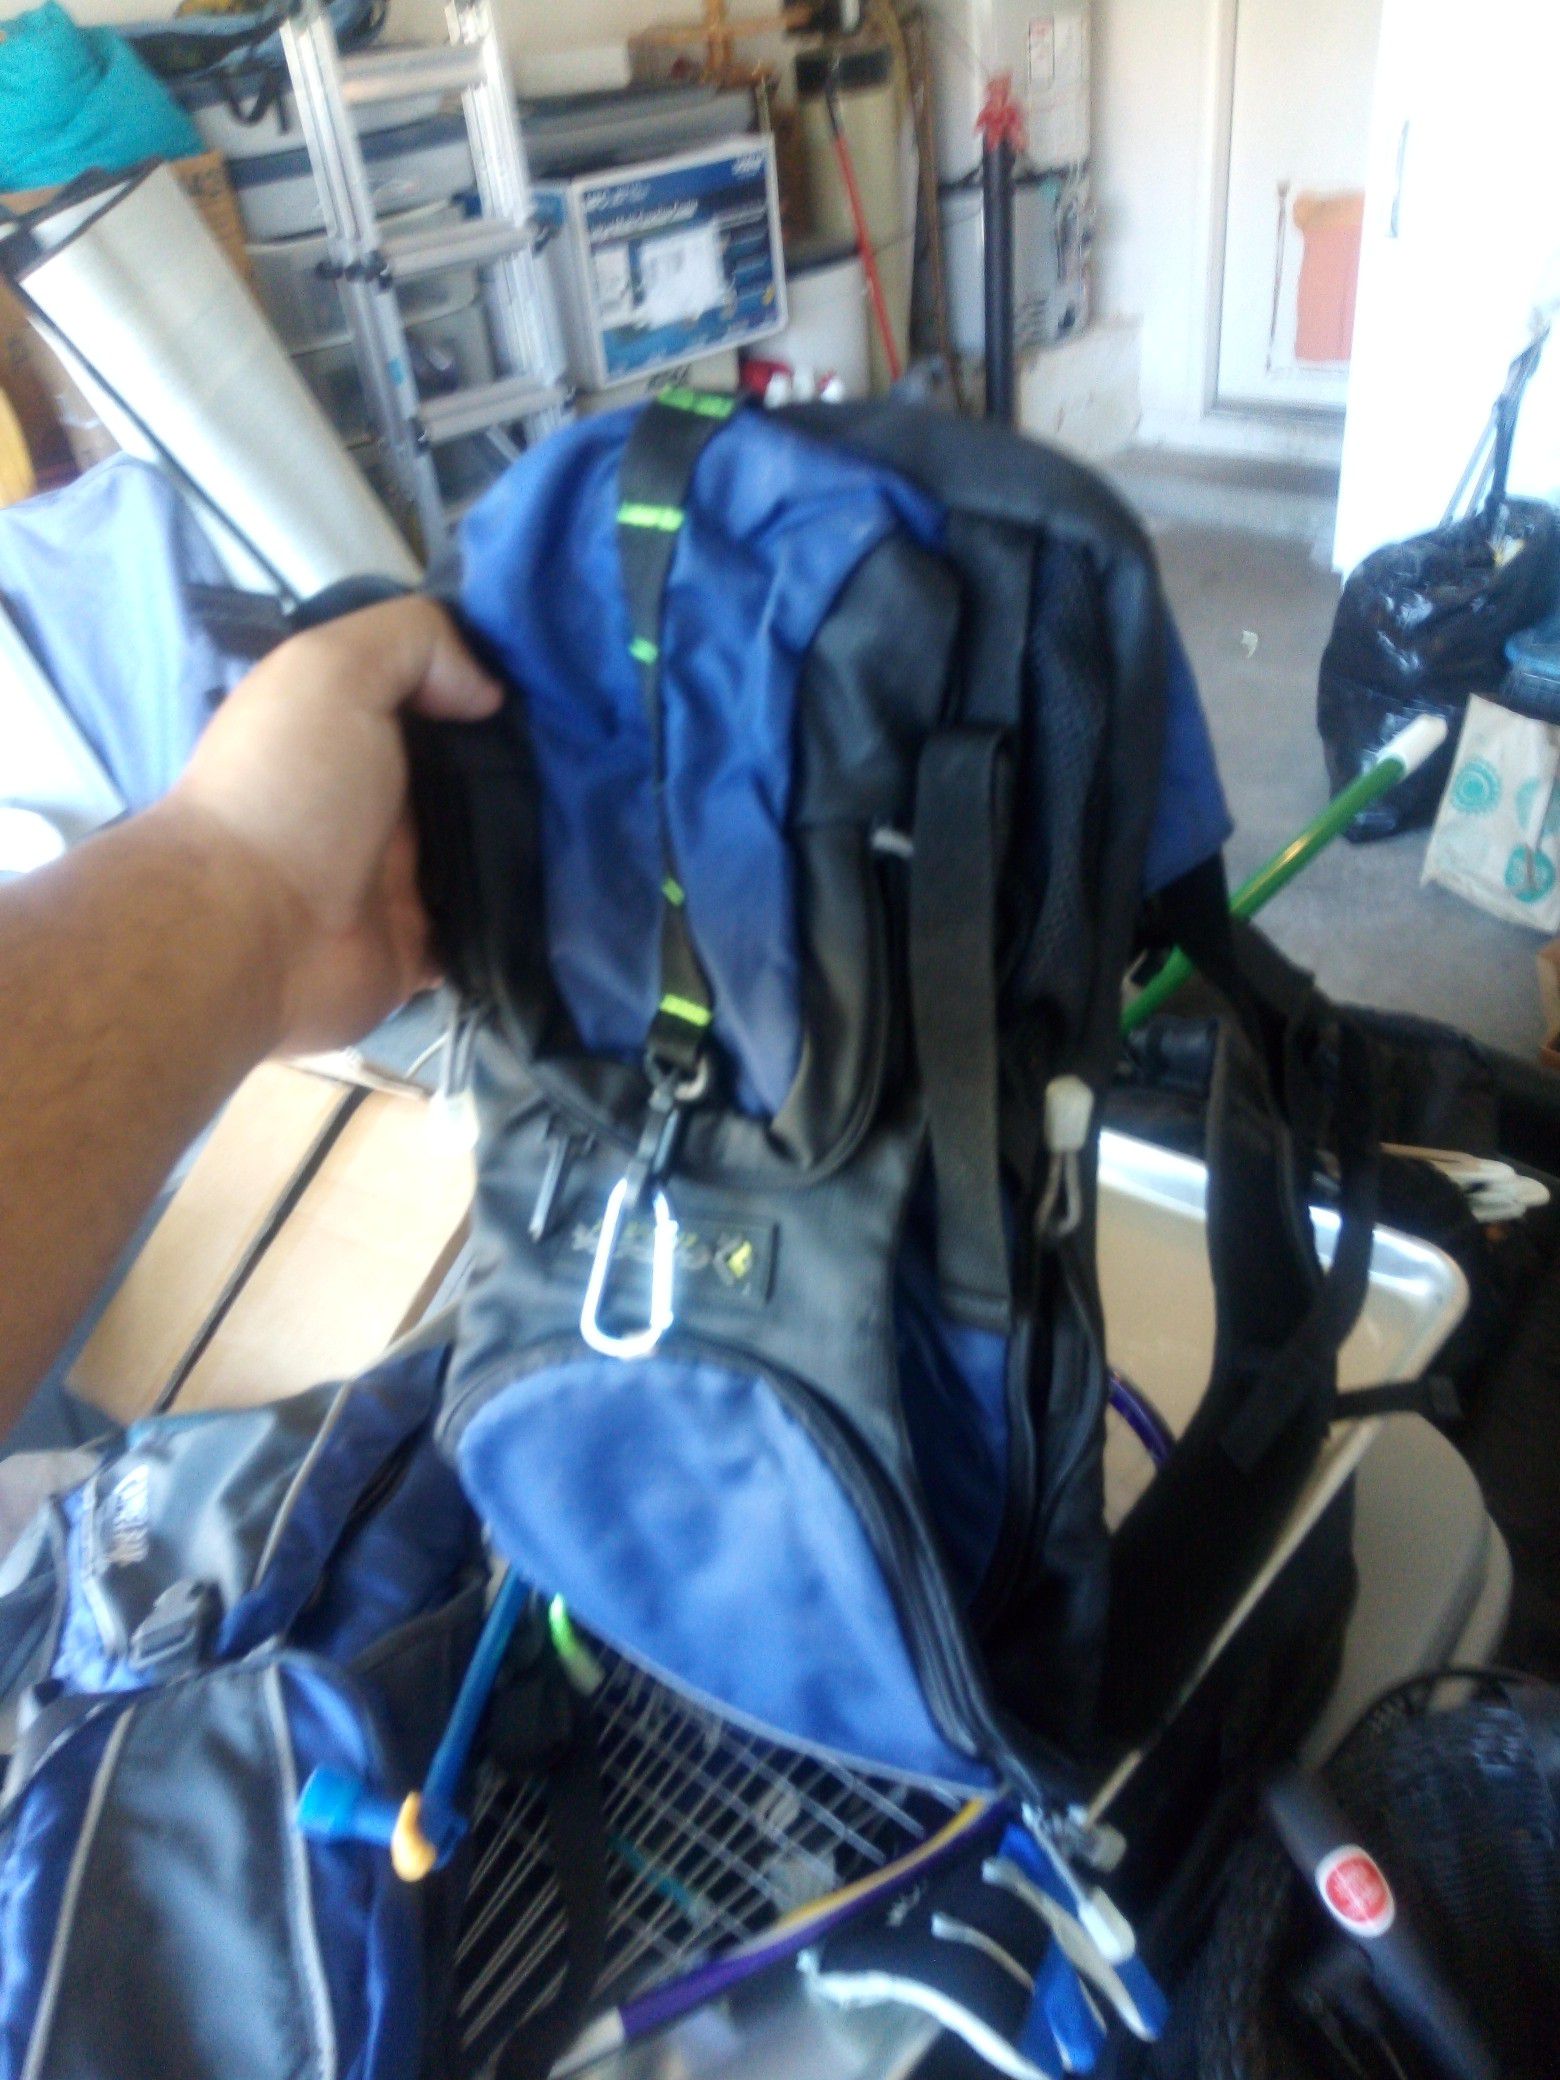 Hiking backpack for water hydration